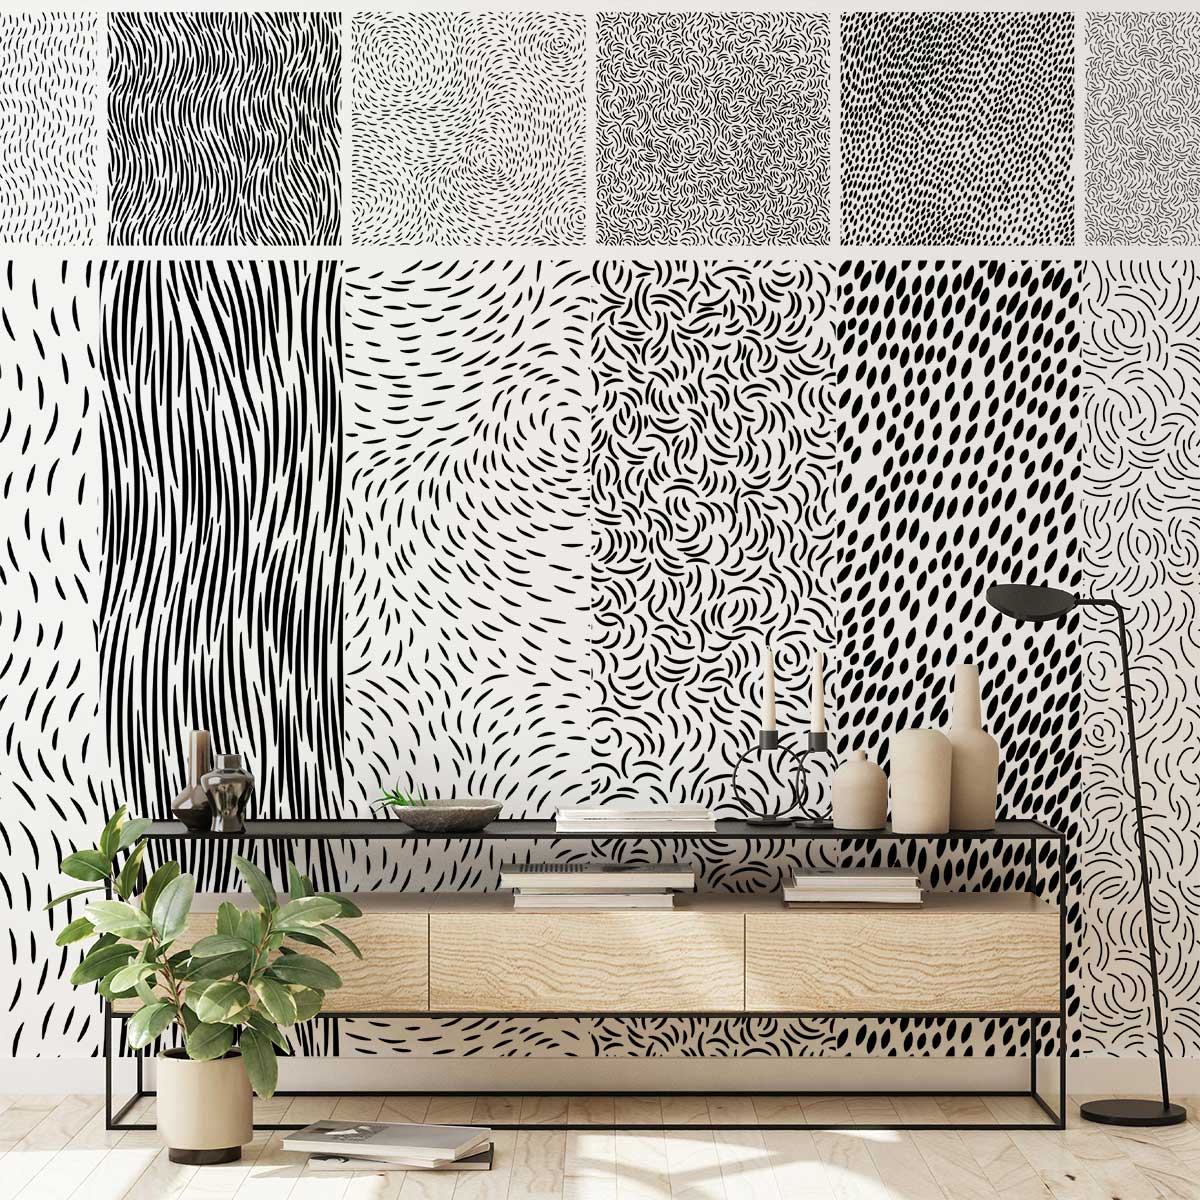 A trendy abstract black line wallpaper mural for the home